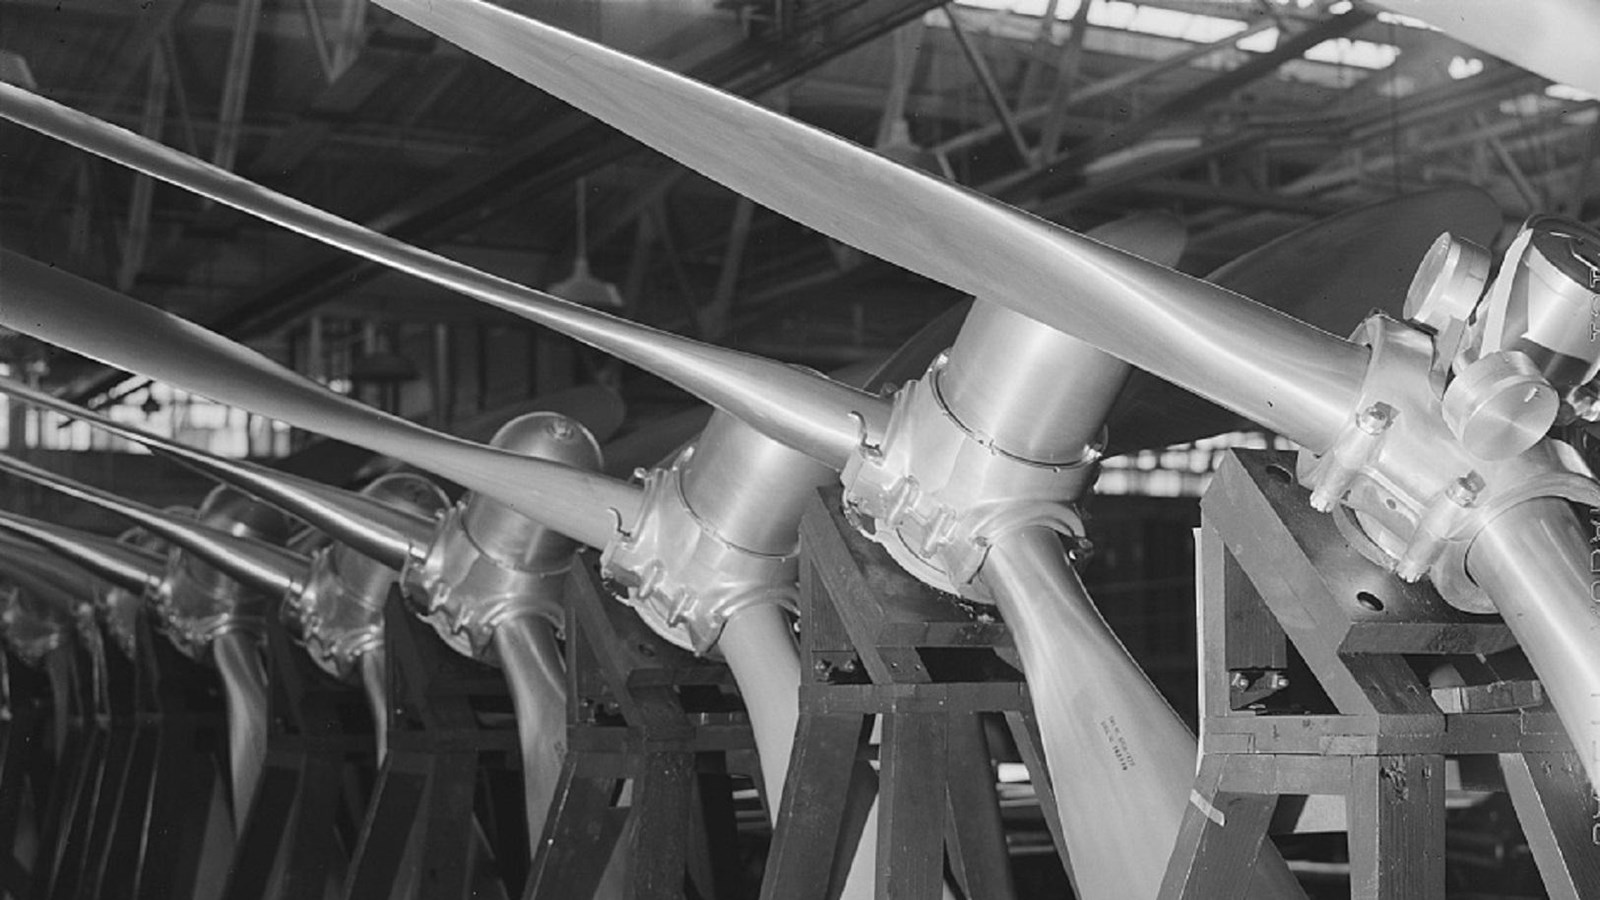 large shaped metal columns or propellers stand in a row